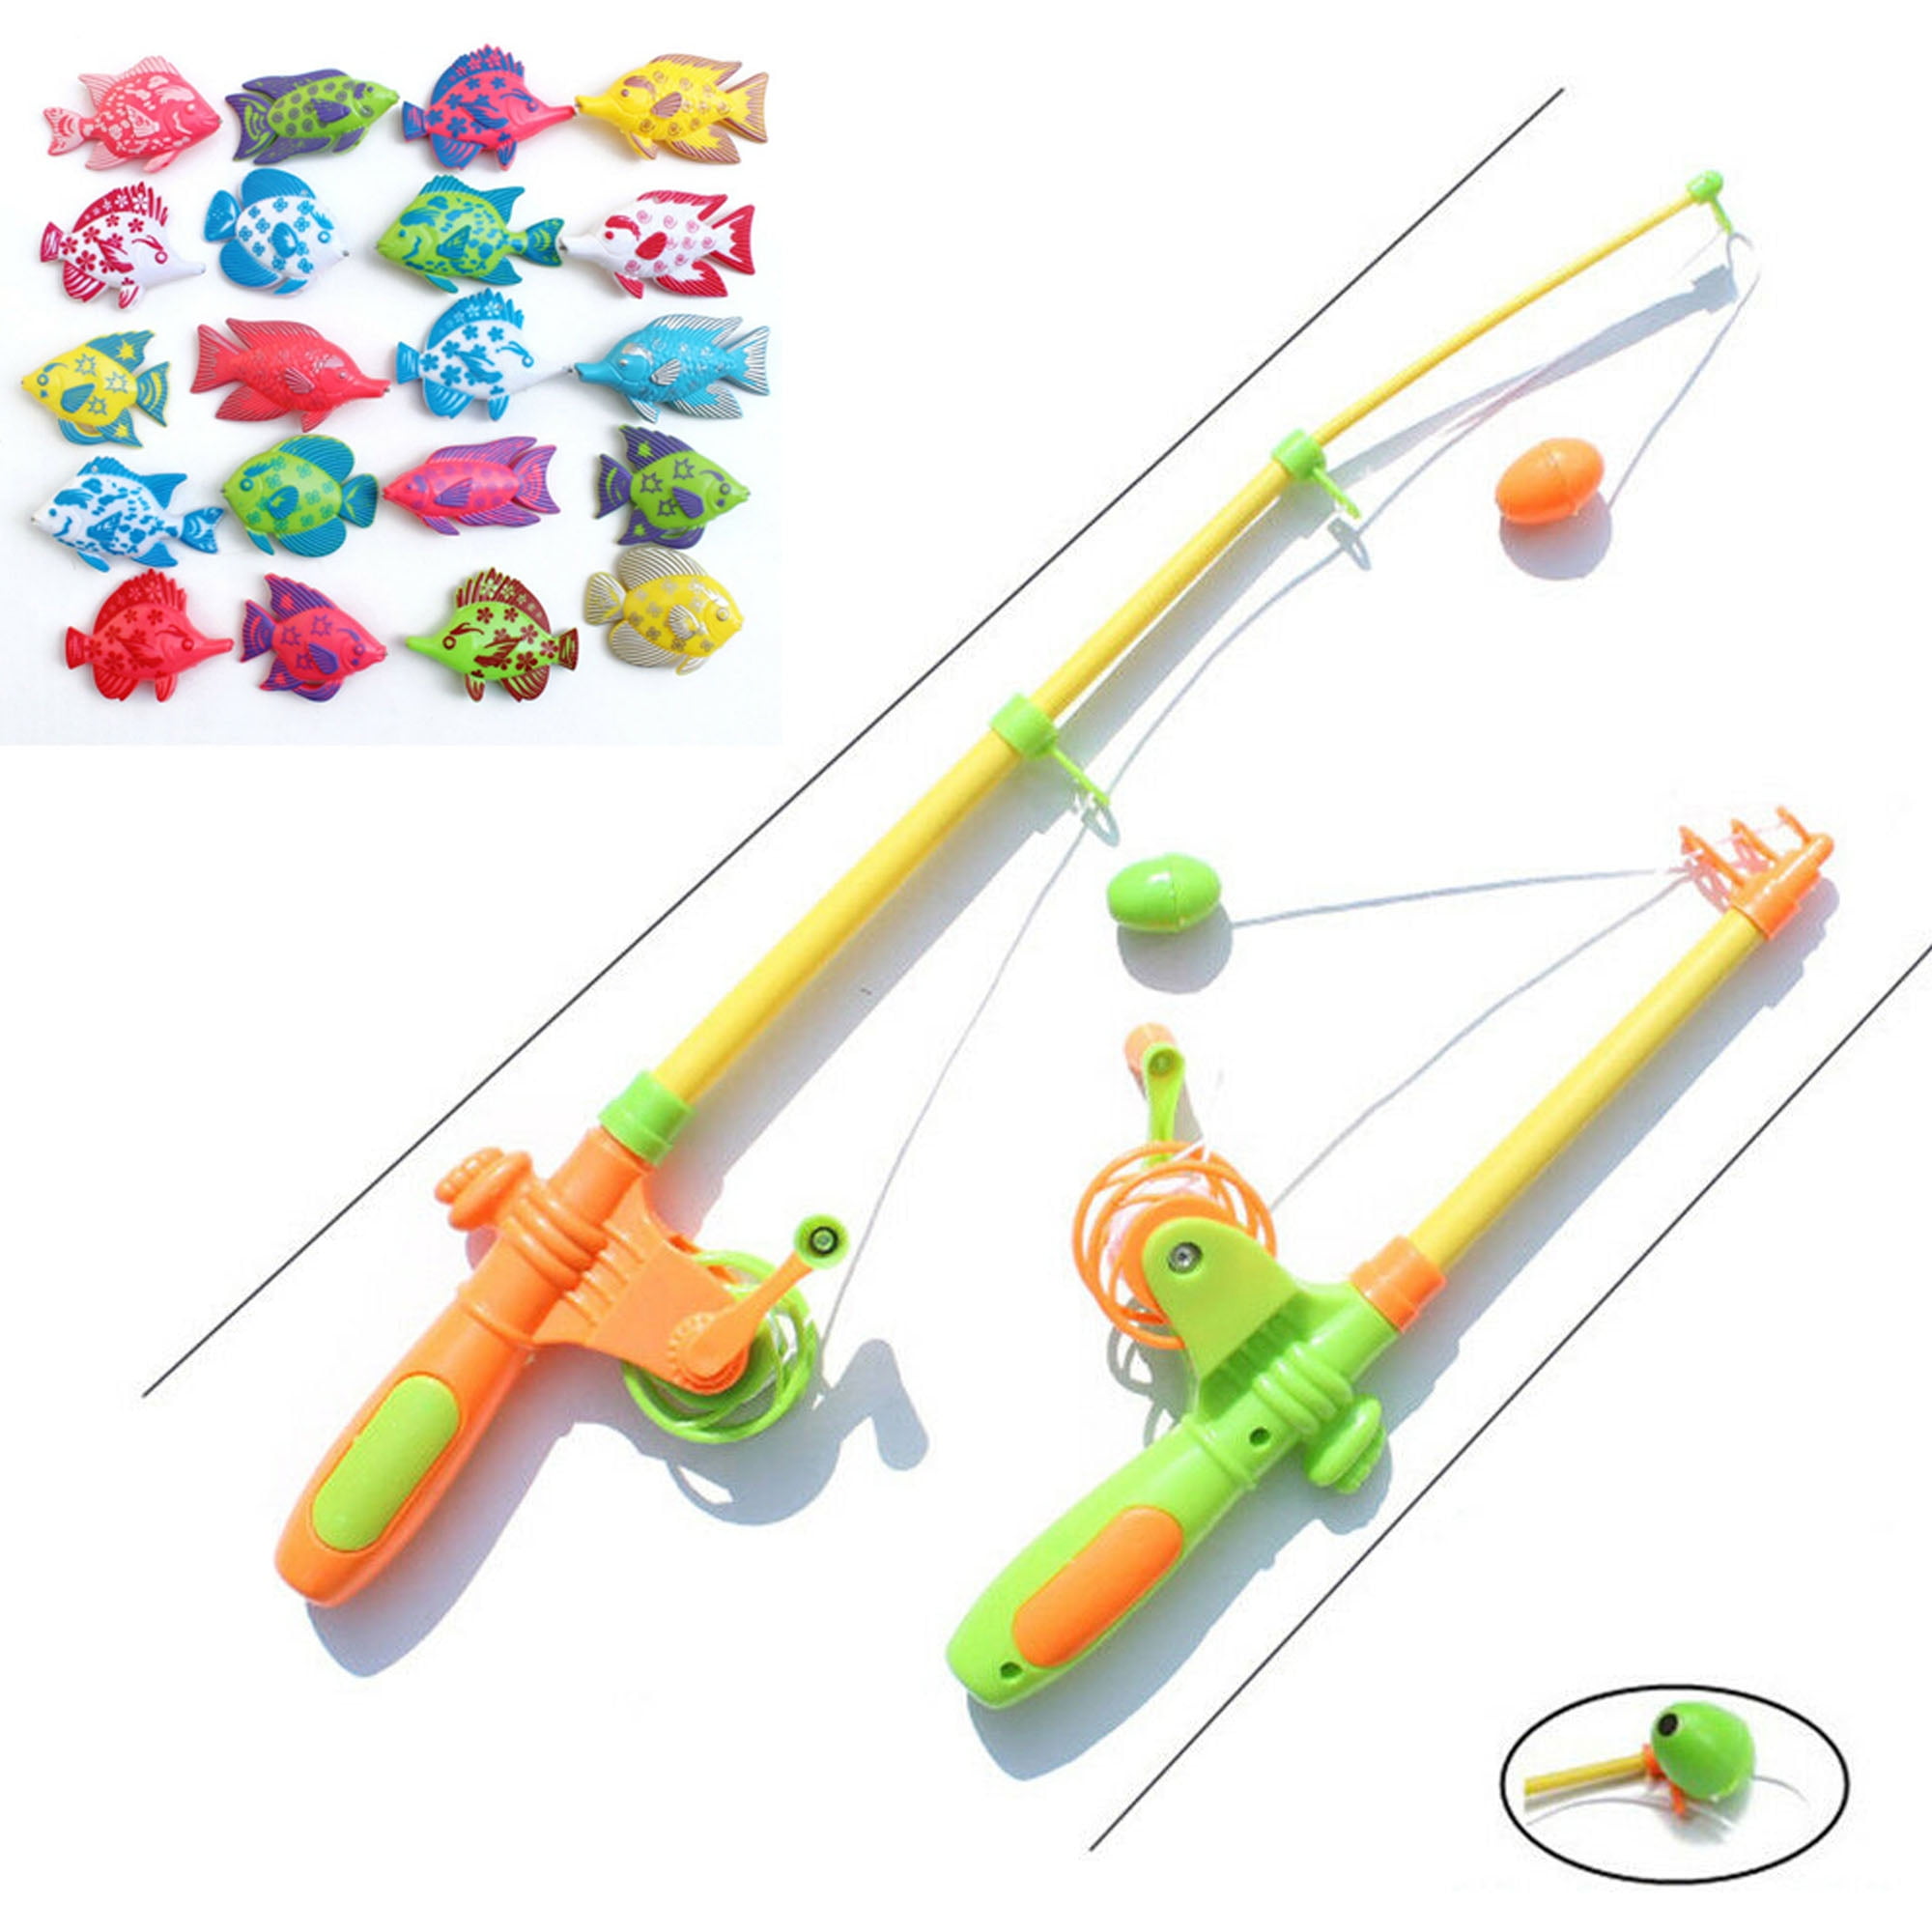 Licupiee Magnetic Fishing Toys 7 Pieces Set Baby's Pole Rod Model